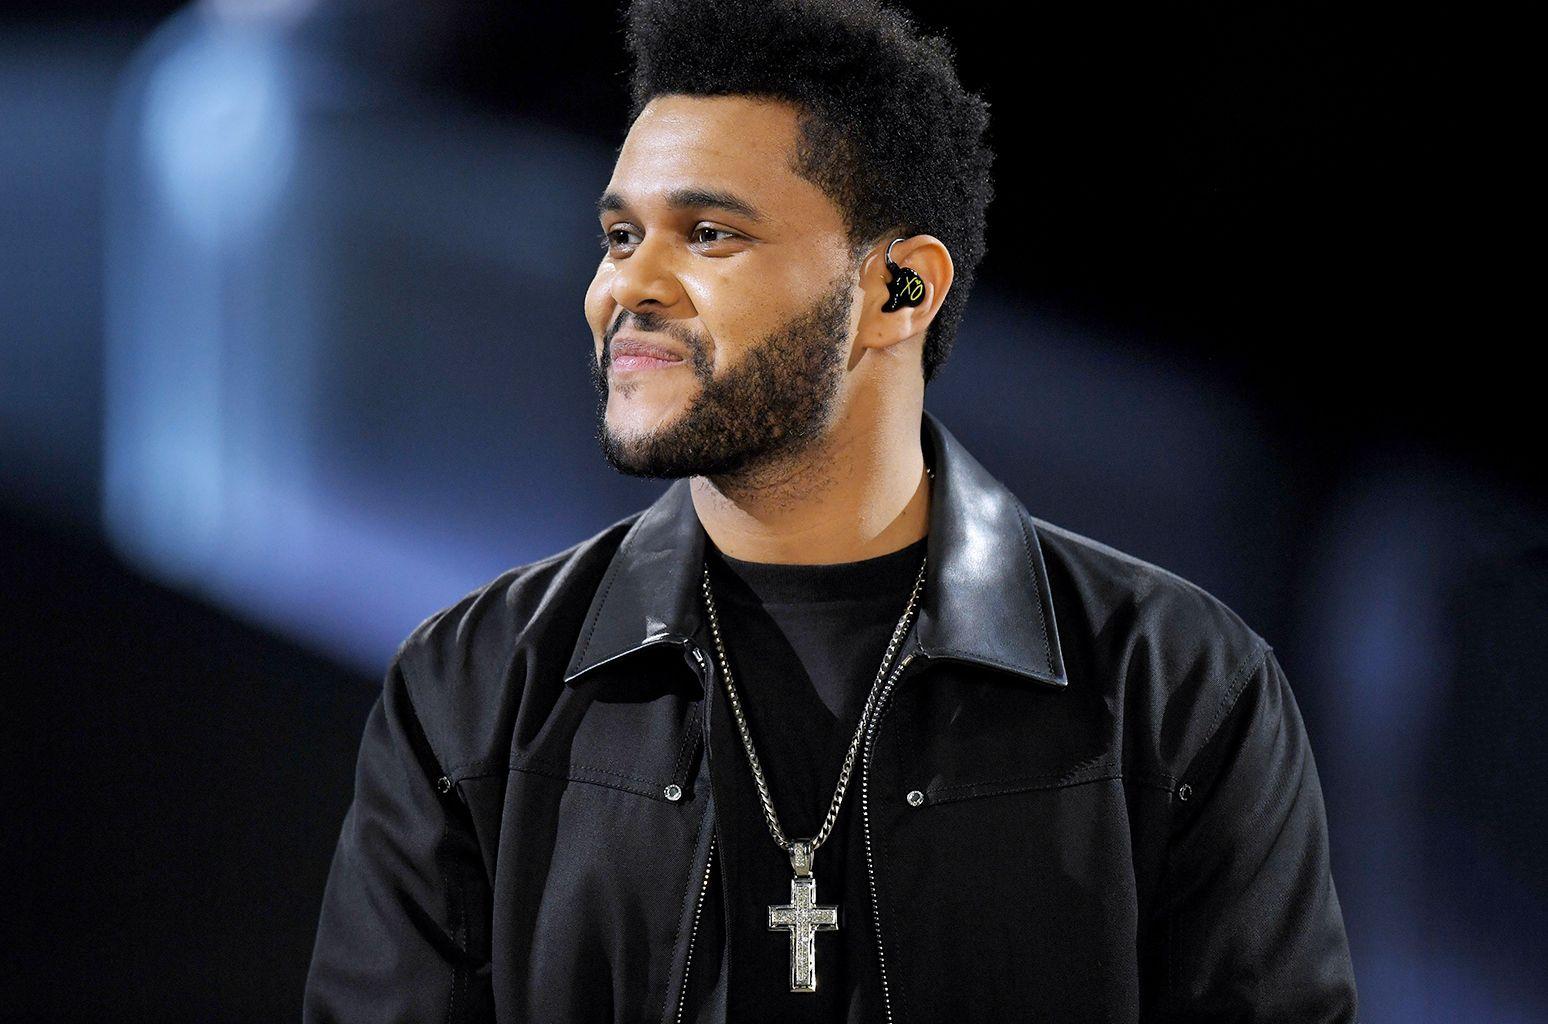 The Weeknd Singer HD Image Picture Wallpaper Download